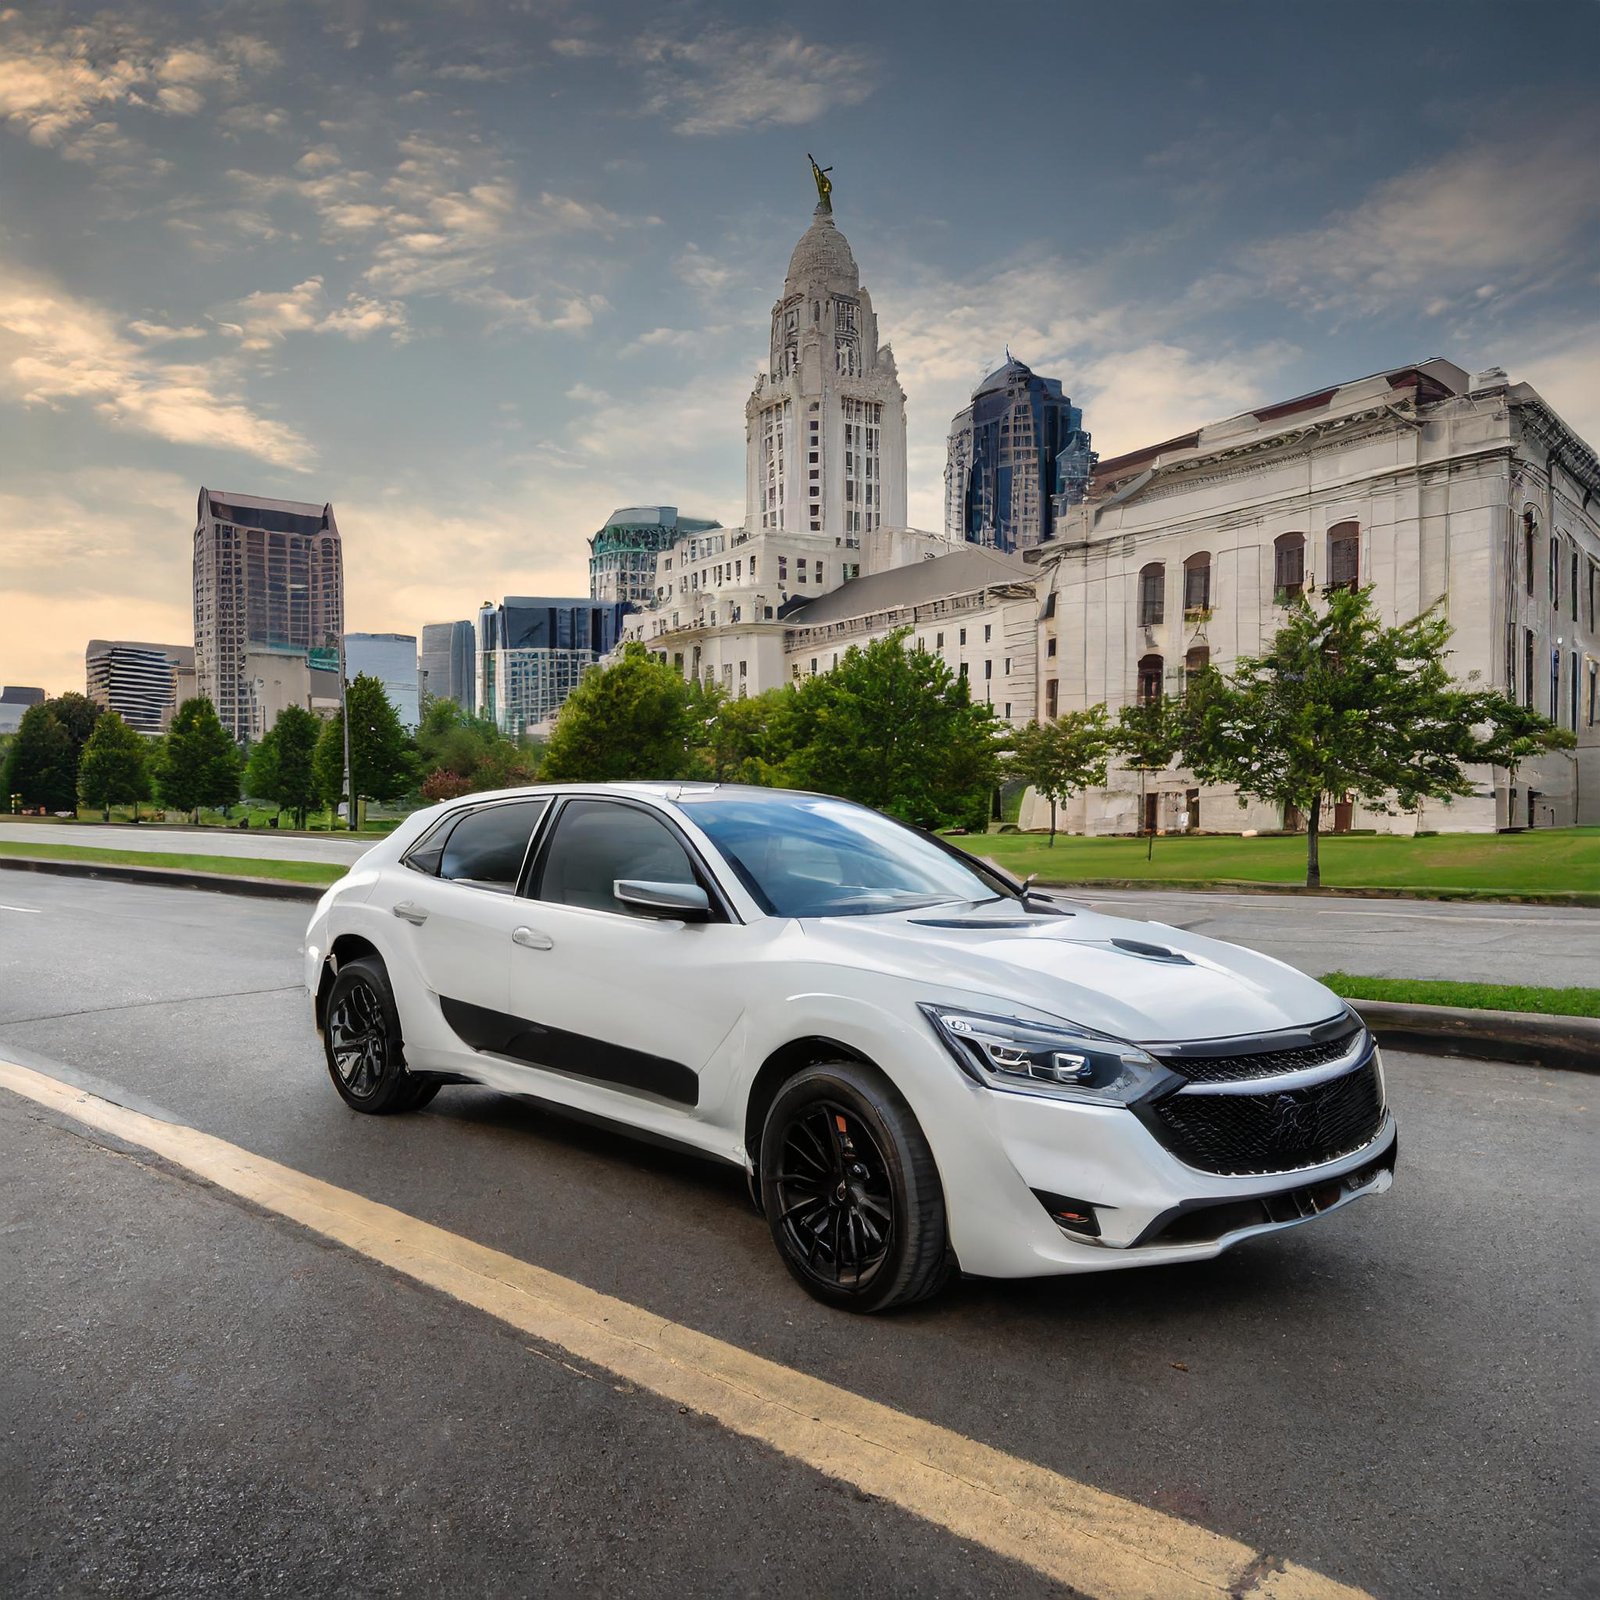 Discover Dependable Cab Service in Cincinnati with Moe’s Airport Taxi Service